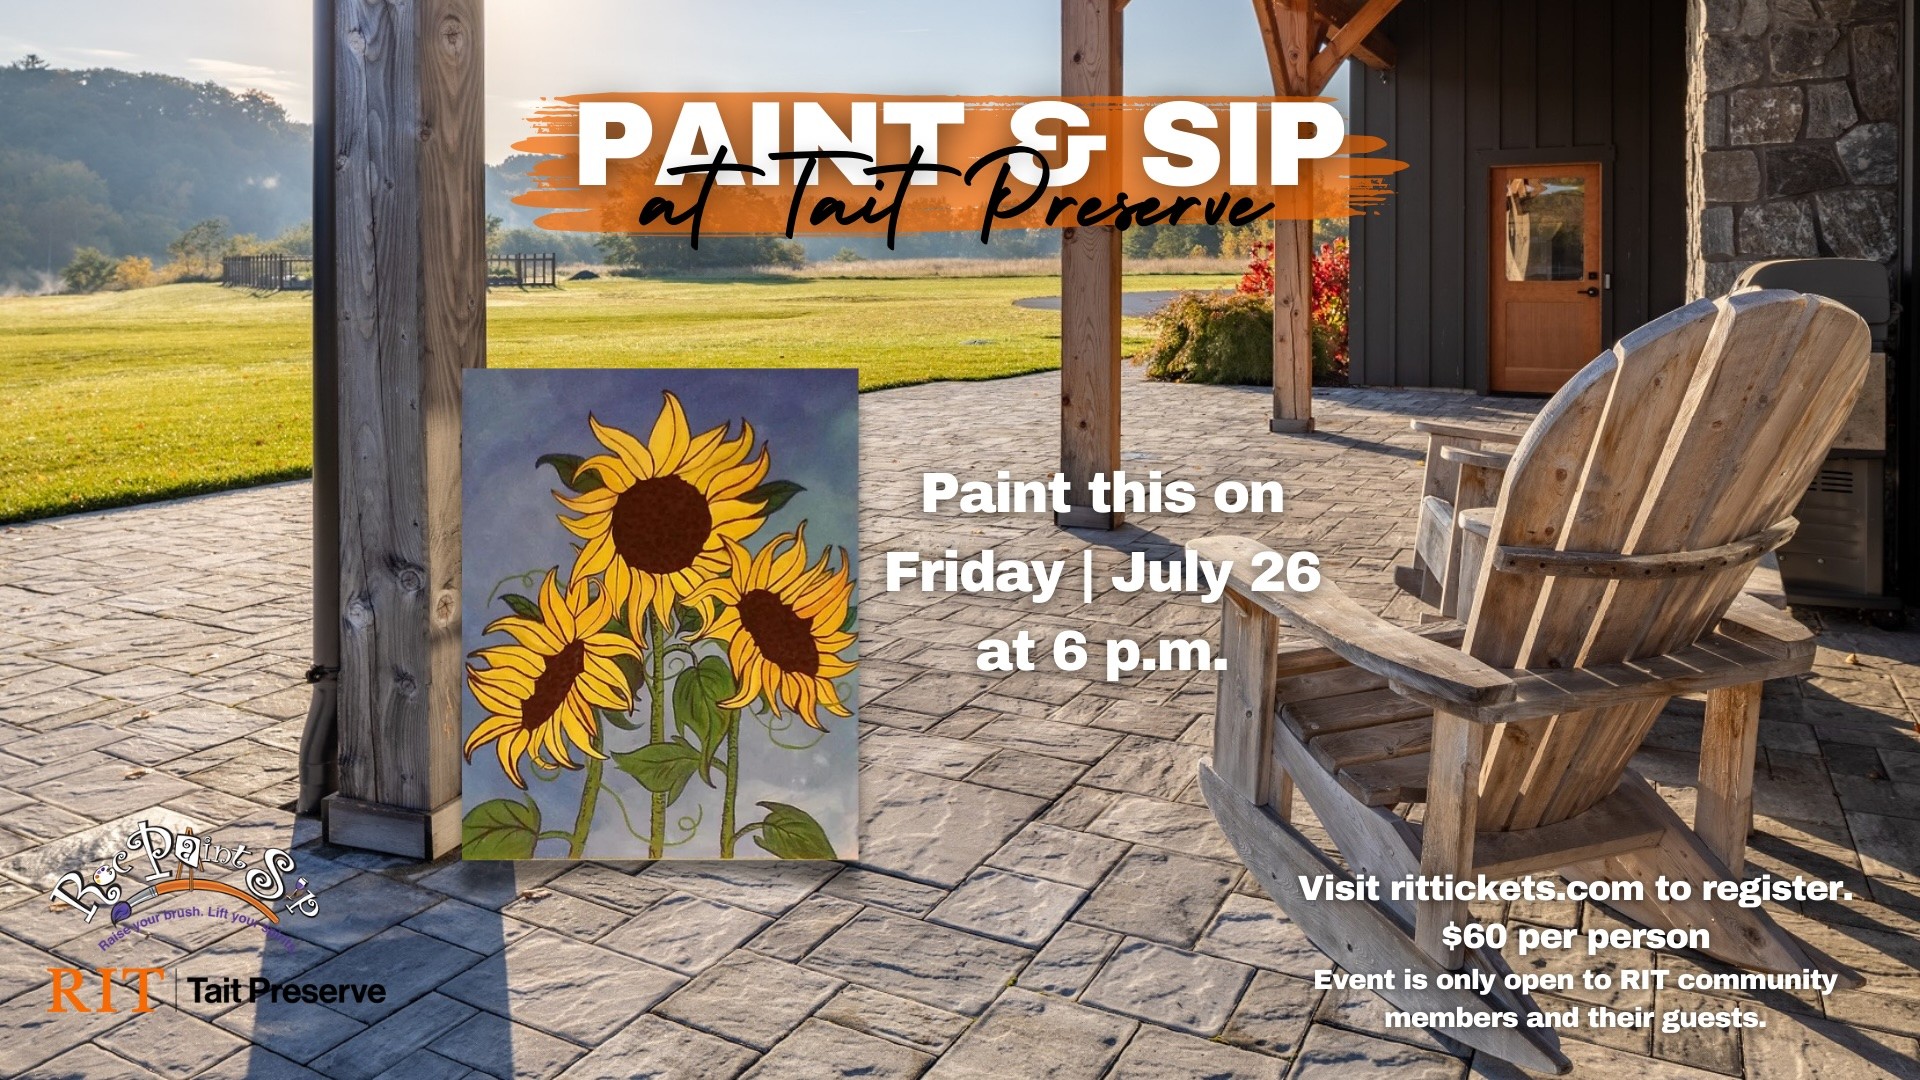 tait patio with paint and sip event details. sun flower painting and logos